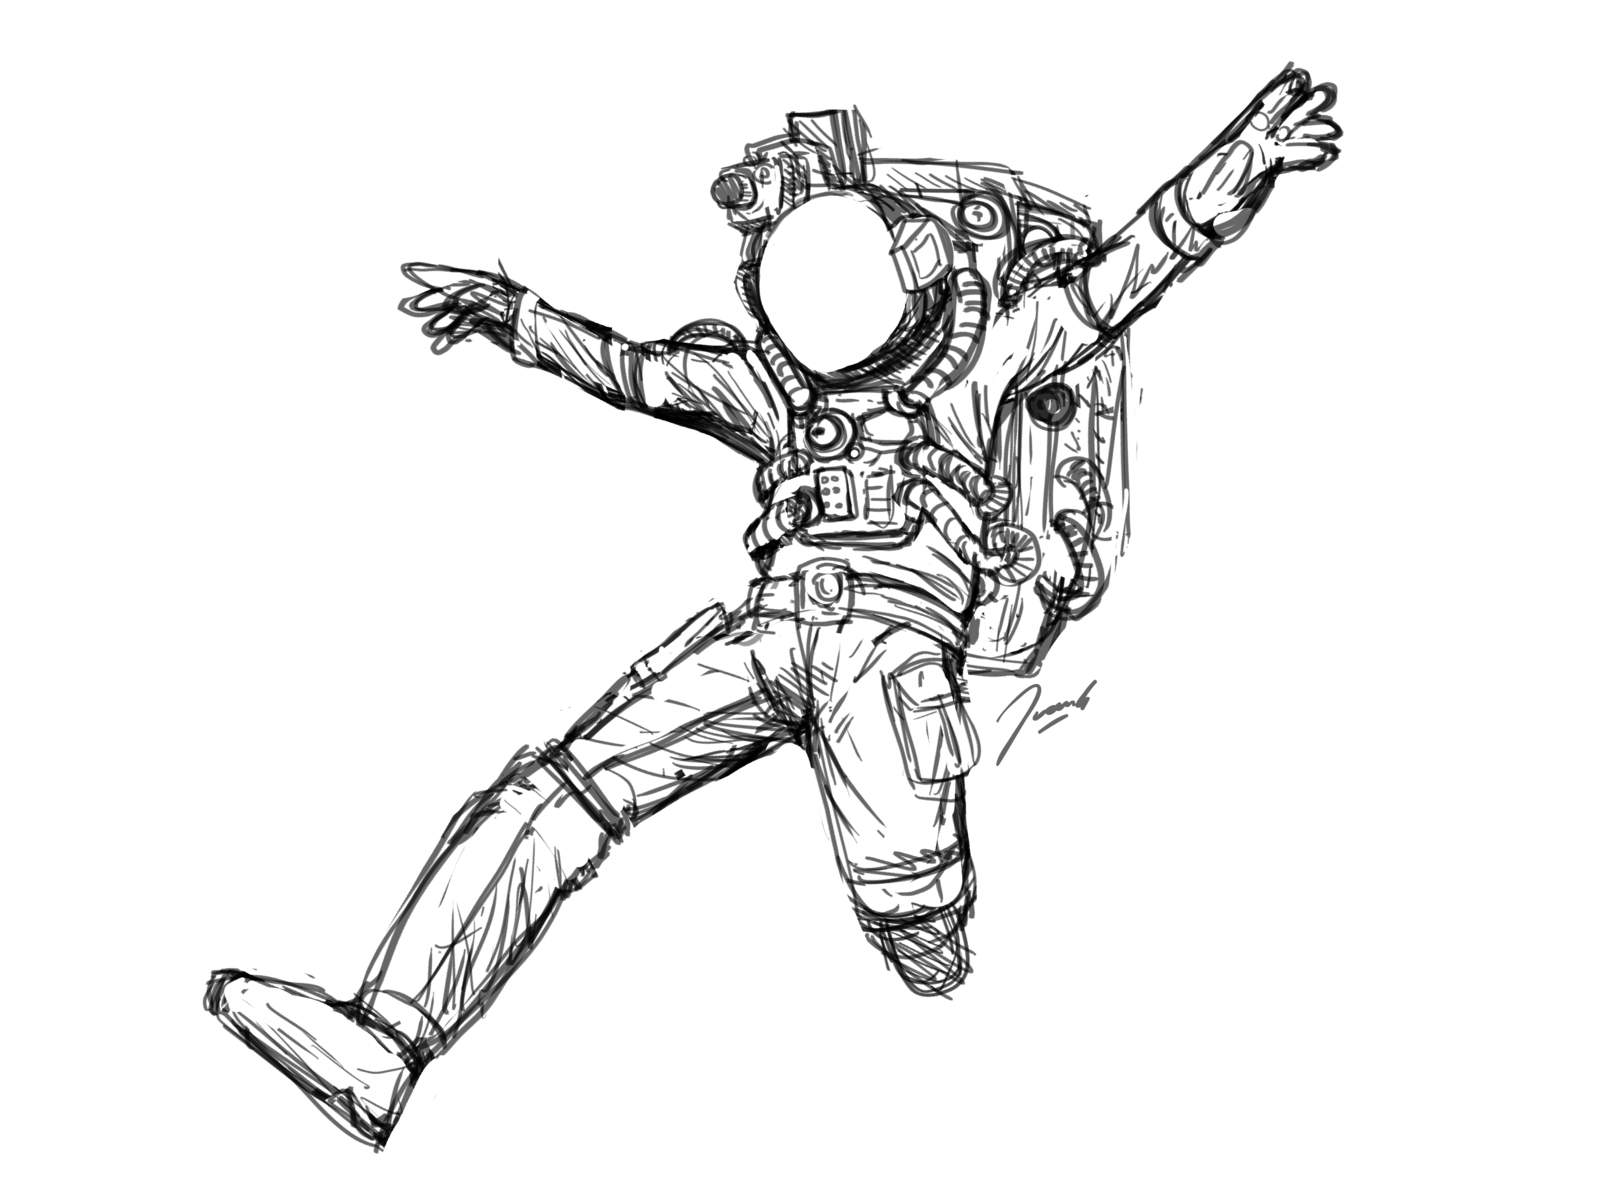 astronaut in space drawing